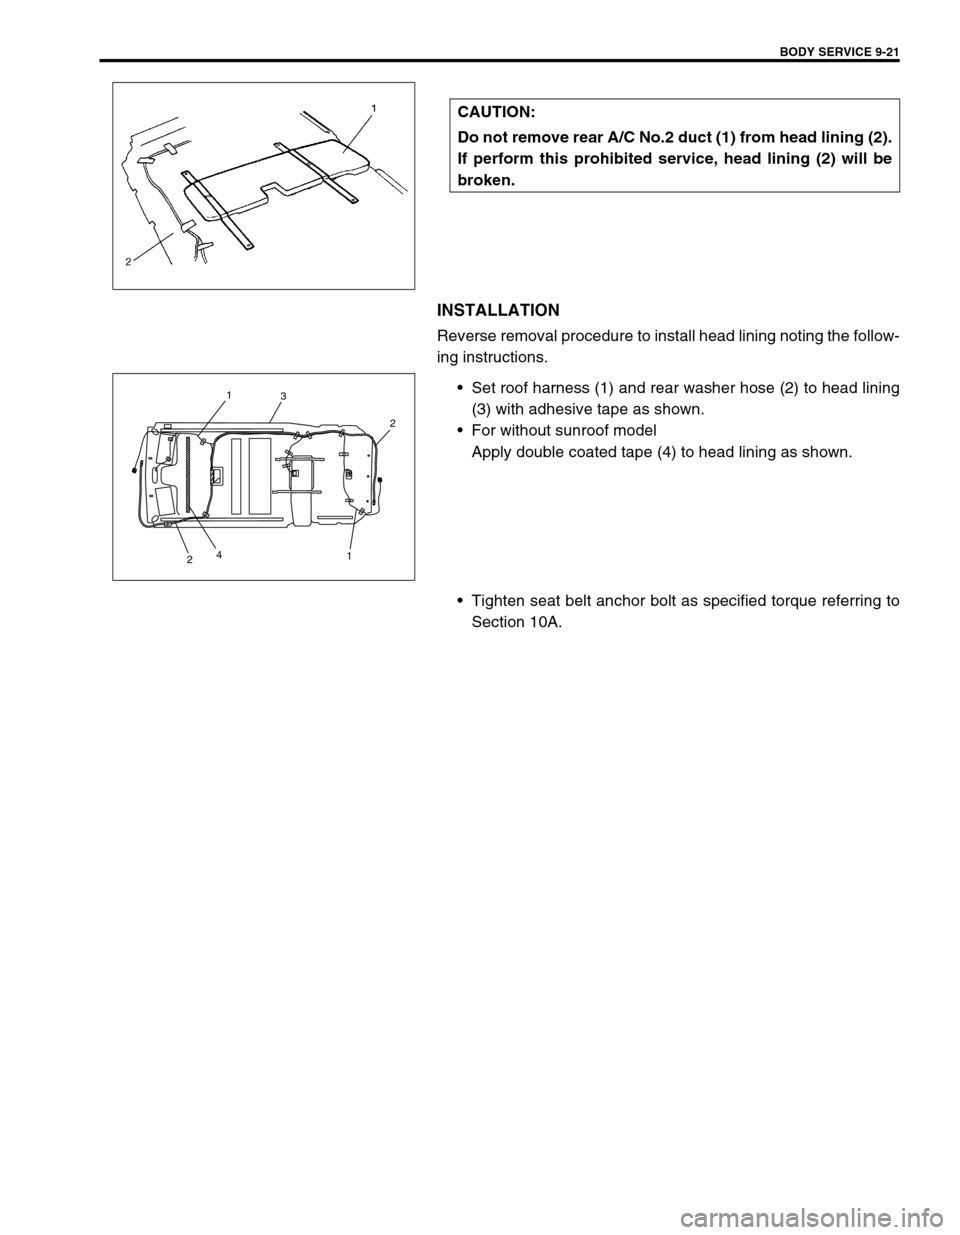 SUZUKI GRAND VITARA 2001 2.G Owners Manual BODY SERVICE 9-21
INSTALLATION
Reverse removal procedure to install head lining noting the follow-
ing instructions.
•Set roof harness (1) and rear washer hose (2) to head lining
(3) with adhesive t